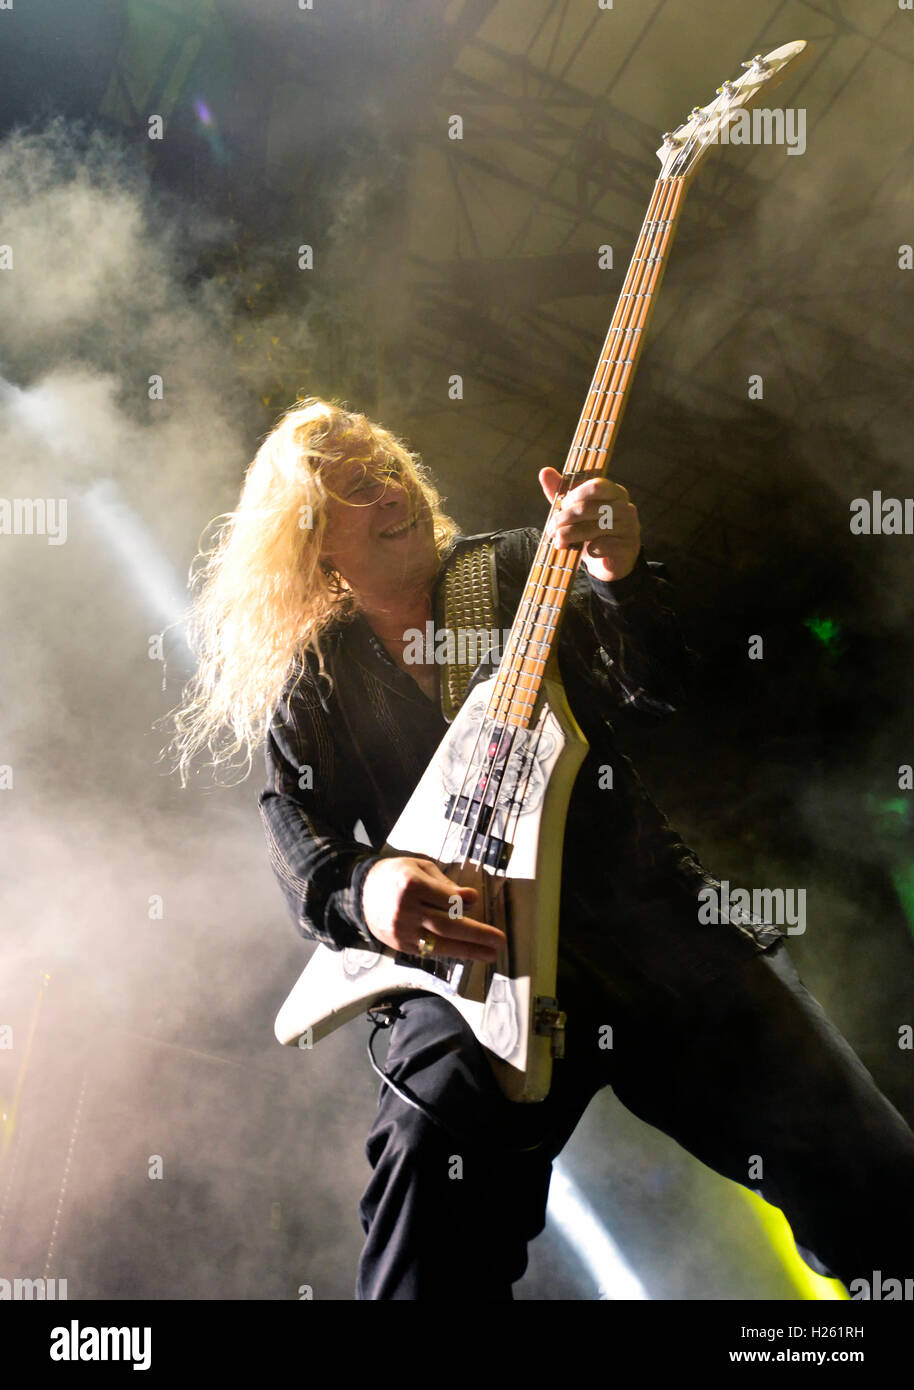 September 17, 2016, Irvine California, Dana Strum Bassist for Vince Neil on stage at the Sirius XM Hair Nation Fest Stock Photo